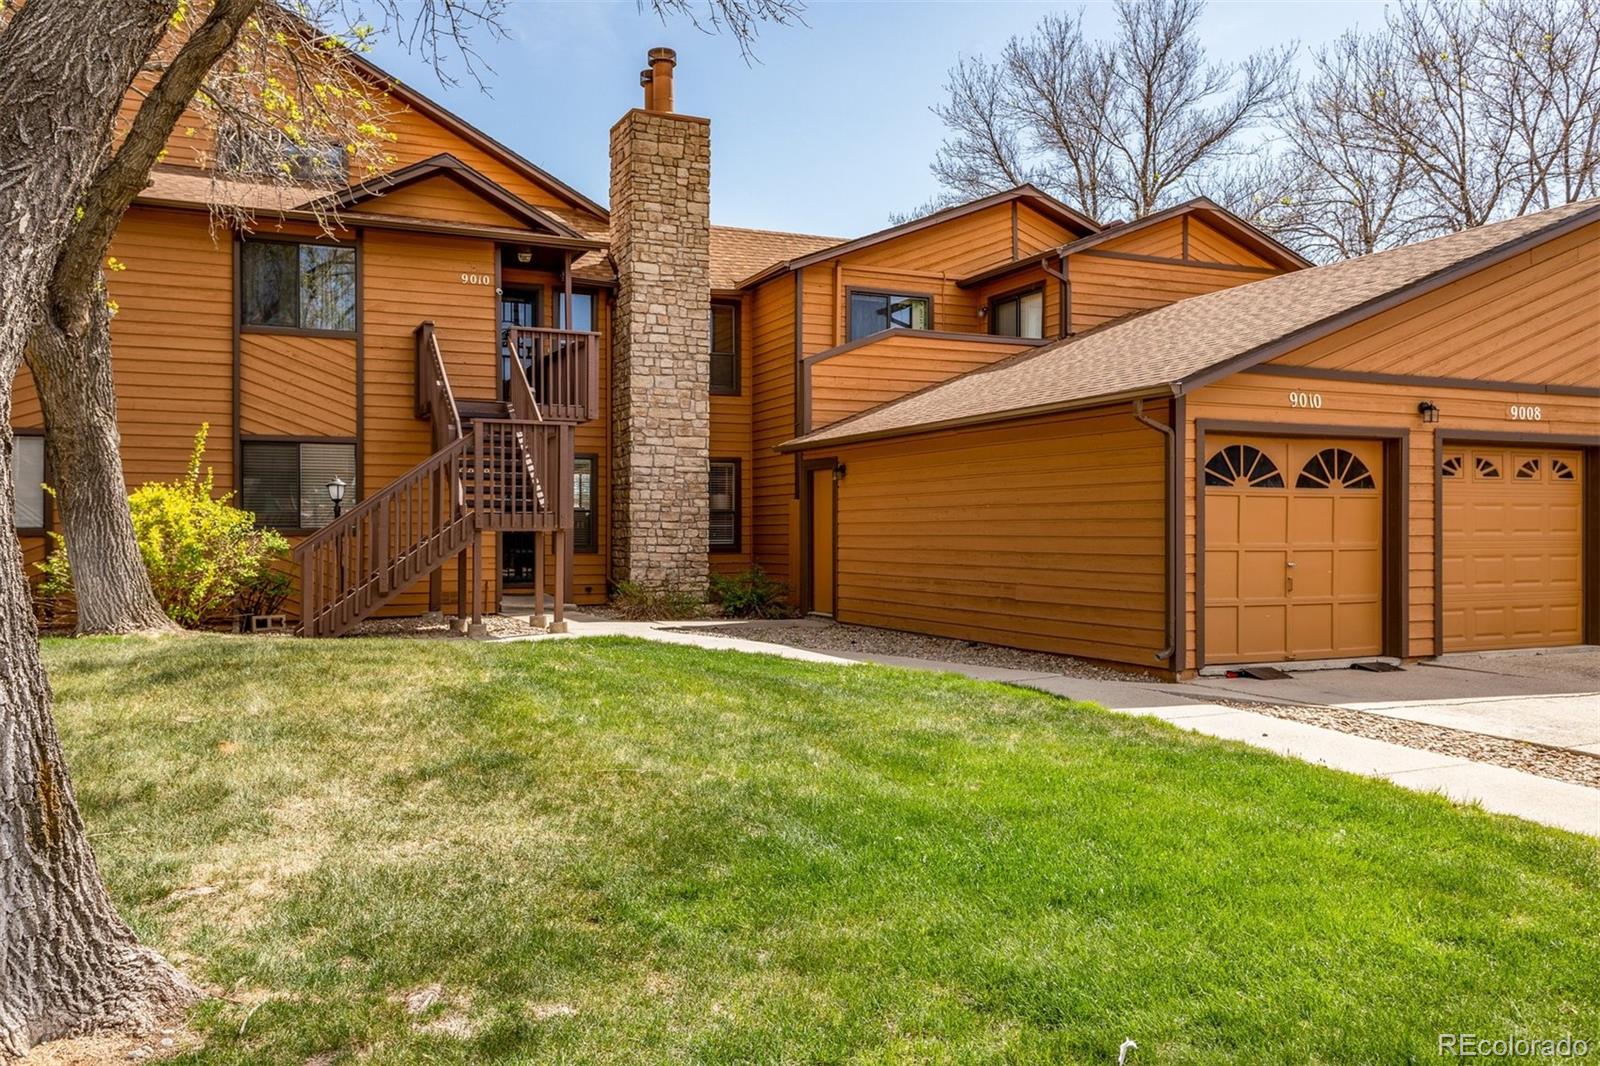 9008 88th, Westminster, CO